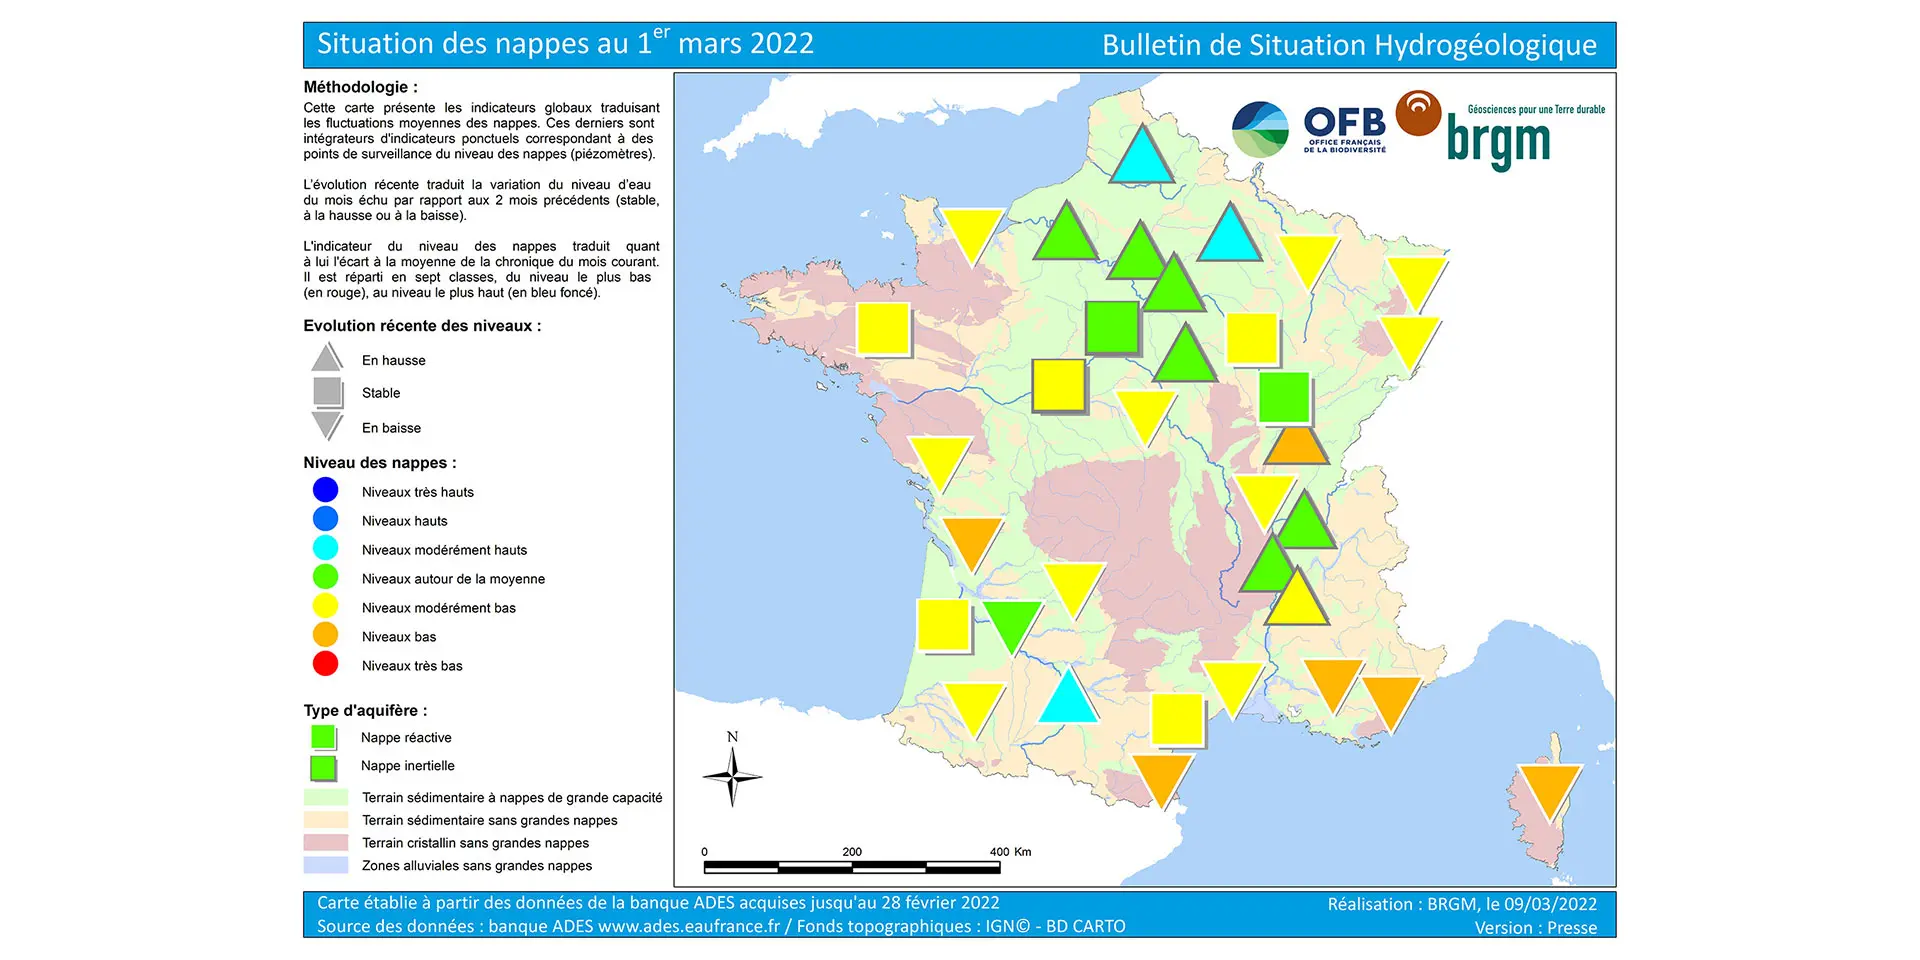 Map of France of the situation of aquifers on 1 March 2022.